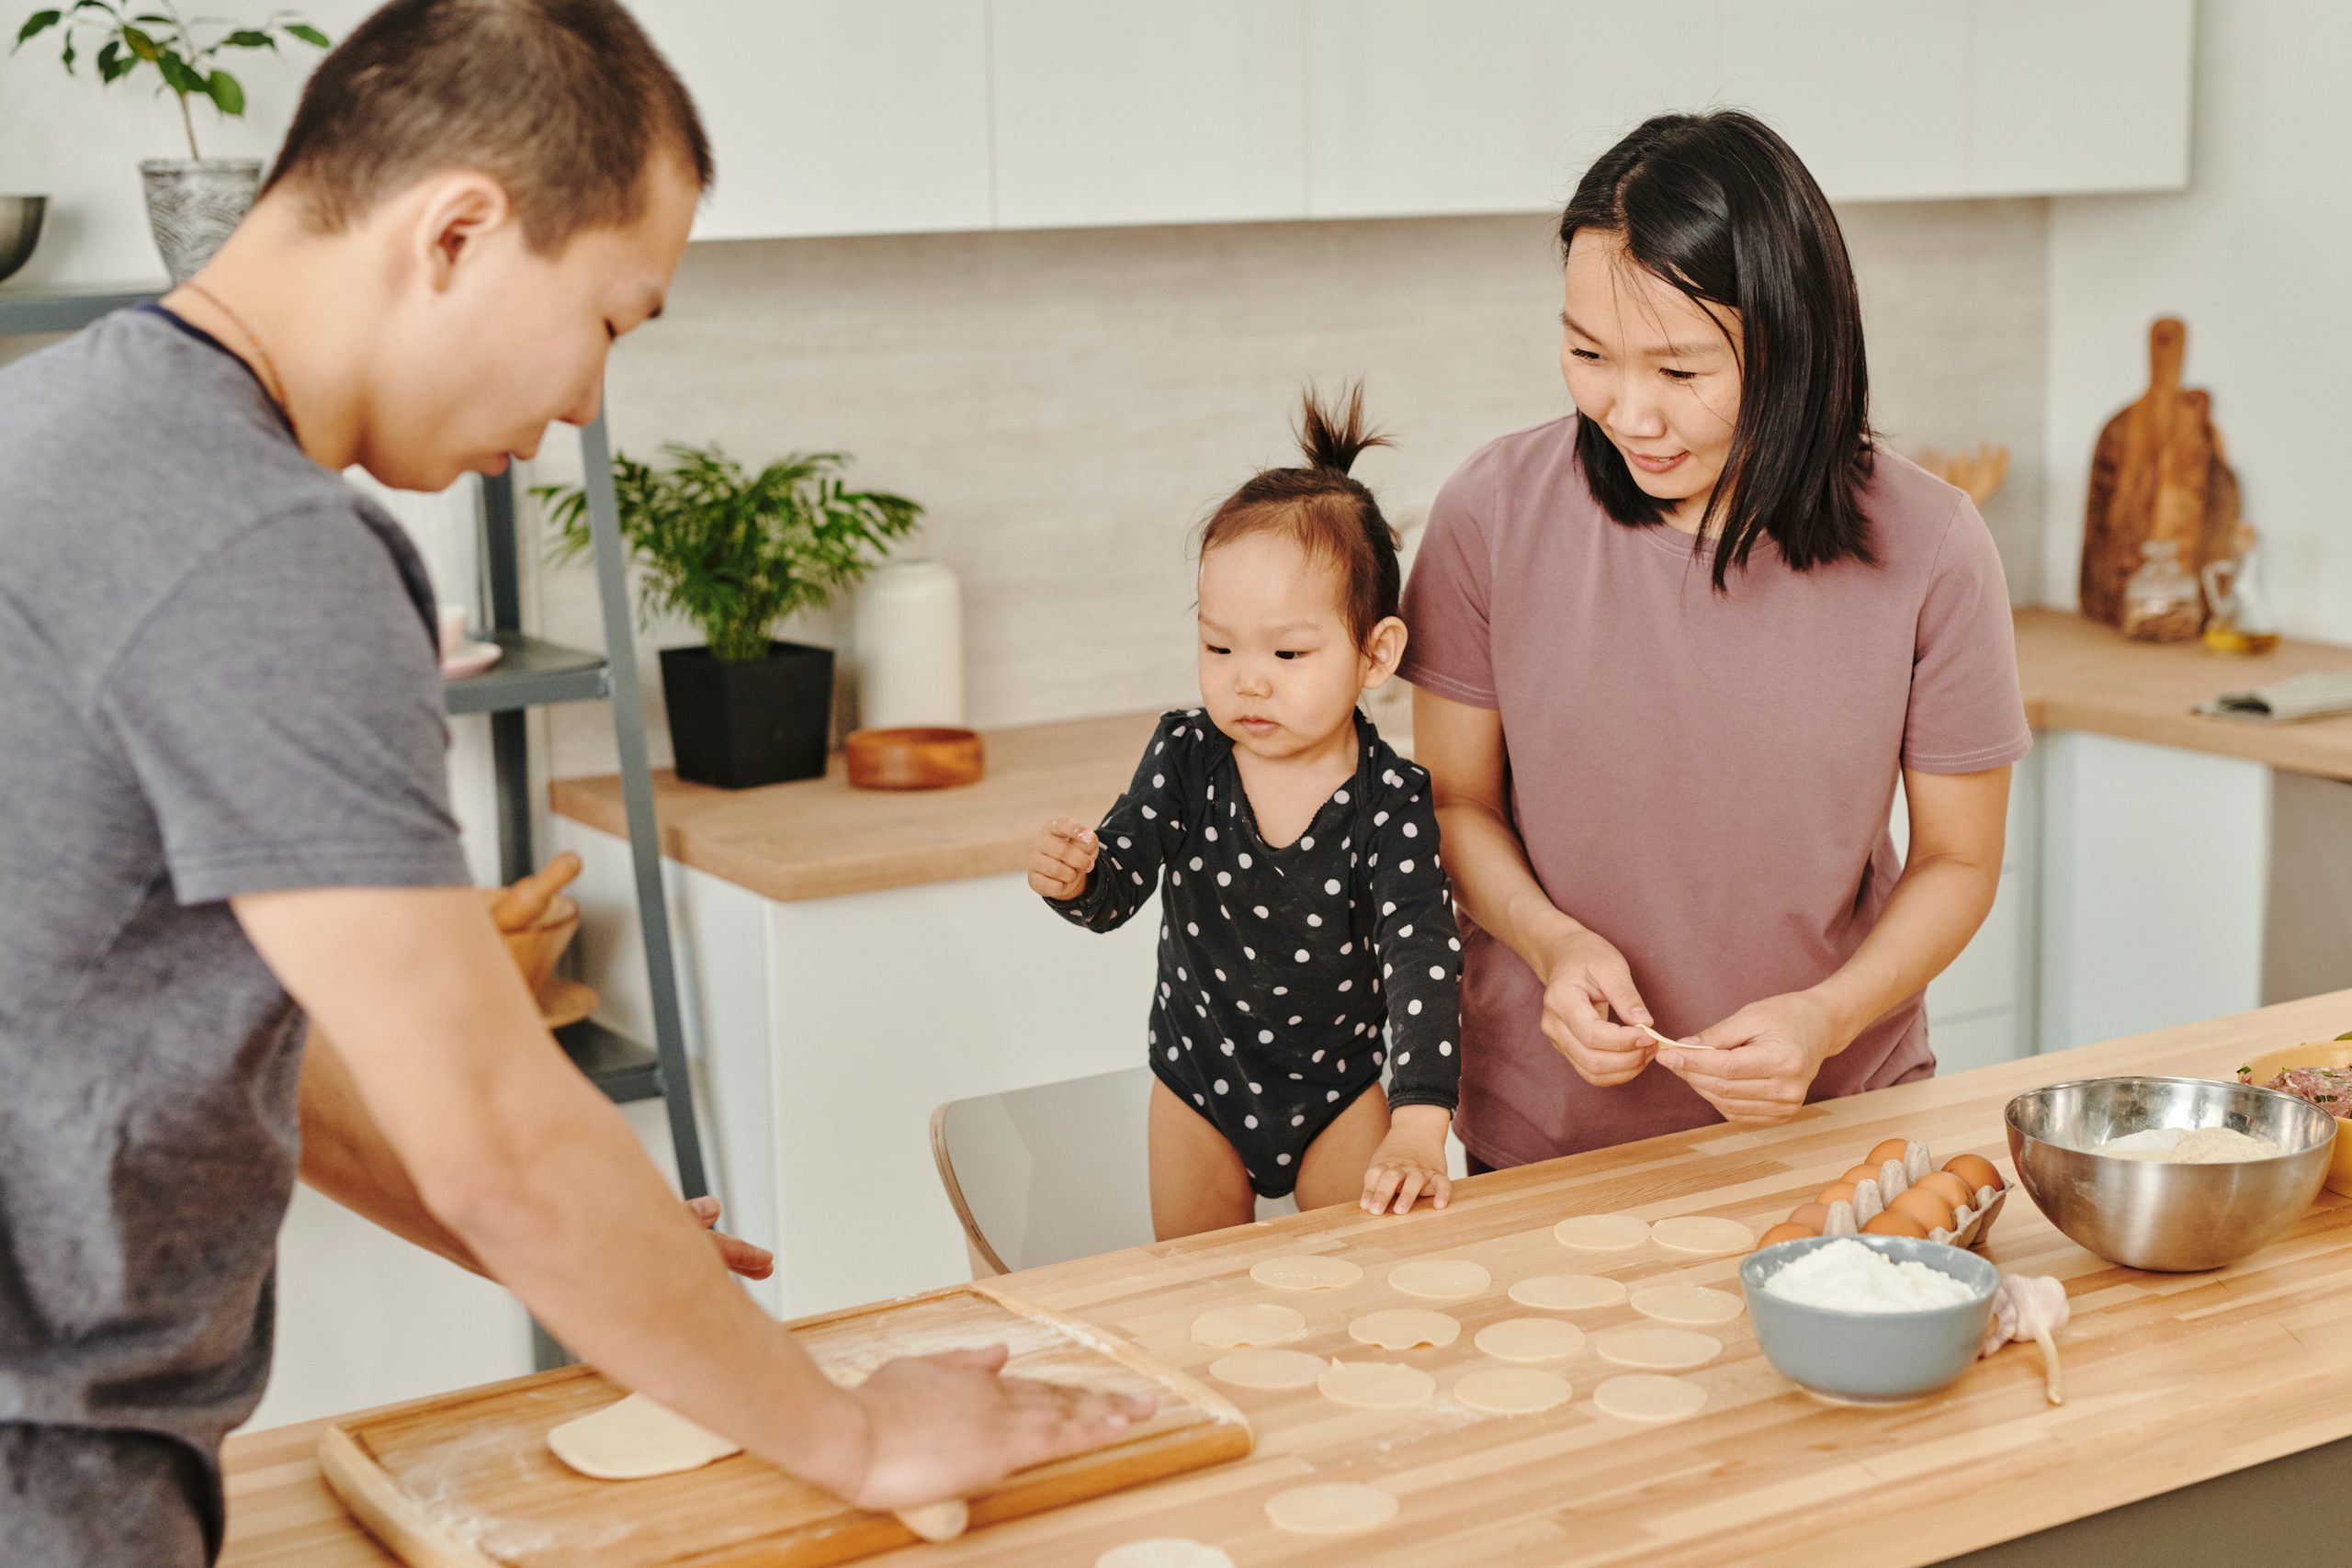 cook and bake as a family